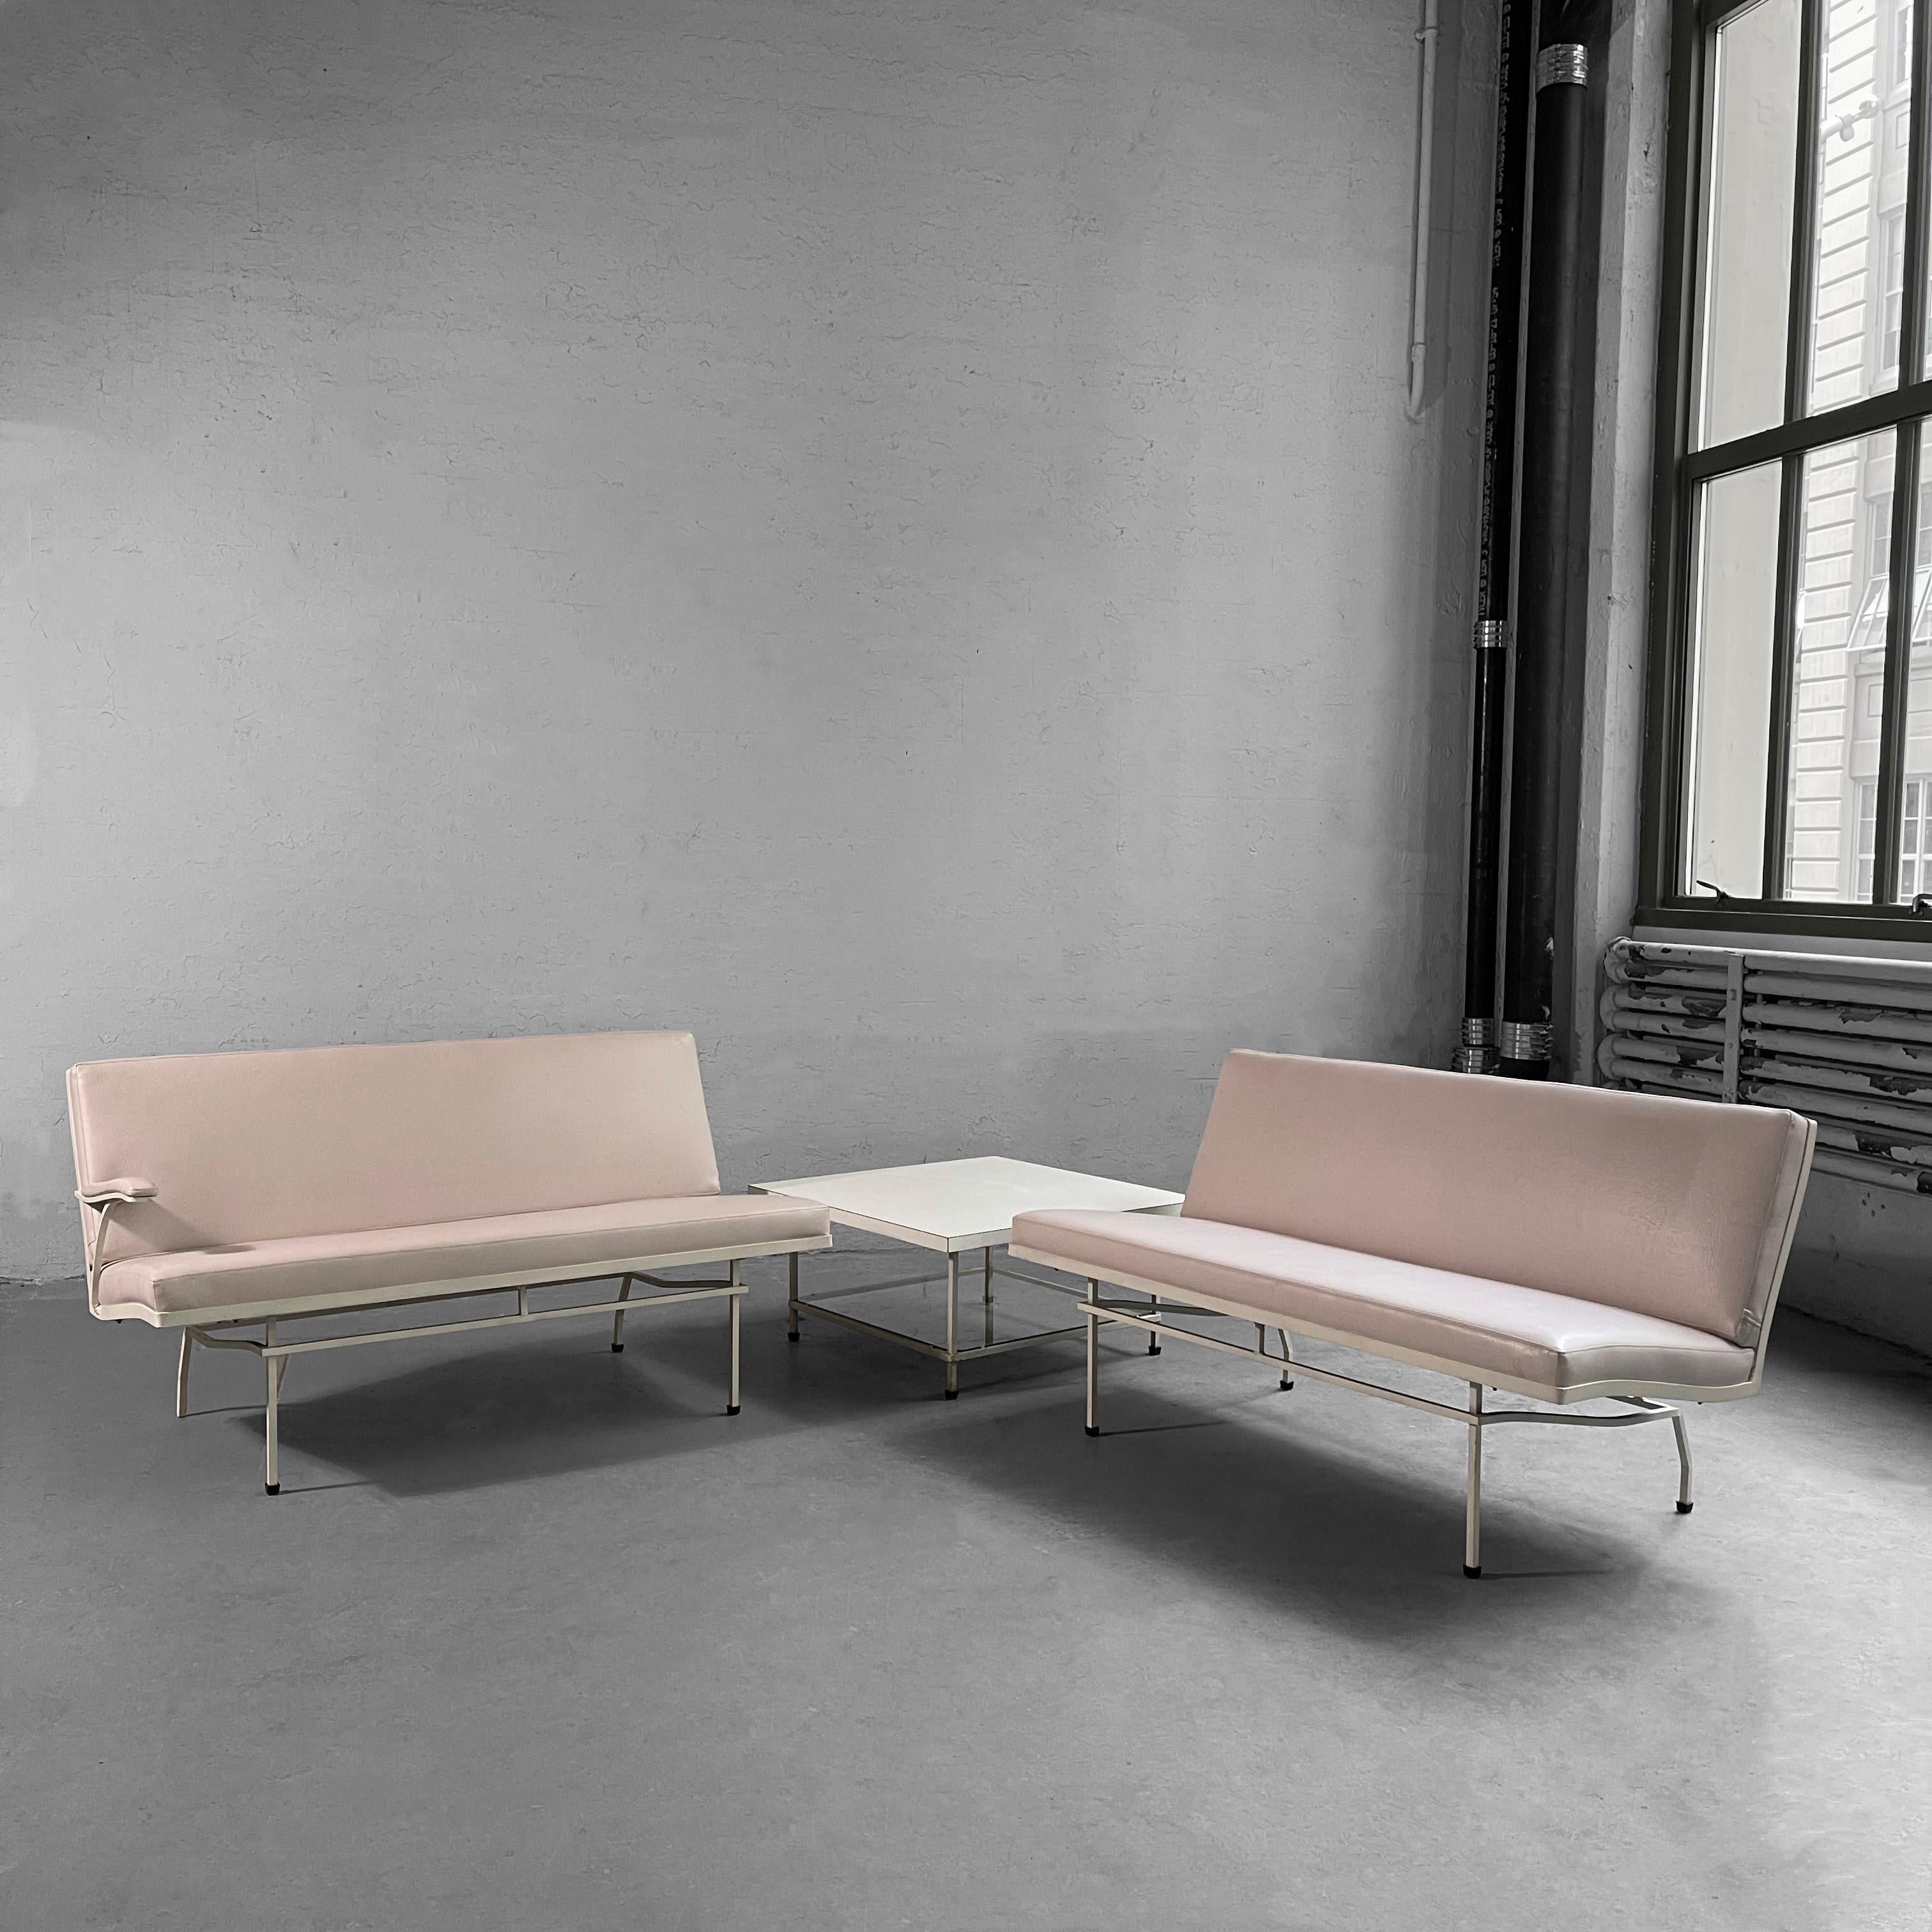 Mid-Century Modern, 3 piece, patio seating set by Lee L Woodard Sons features two, painted wrought iron, 3 seat sofas upholstered in pale pink textured outdoor vinyl with matching, wrought iron, tiered side table with formica top and glass shelf at